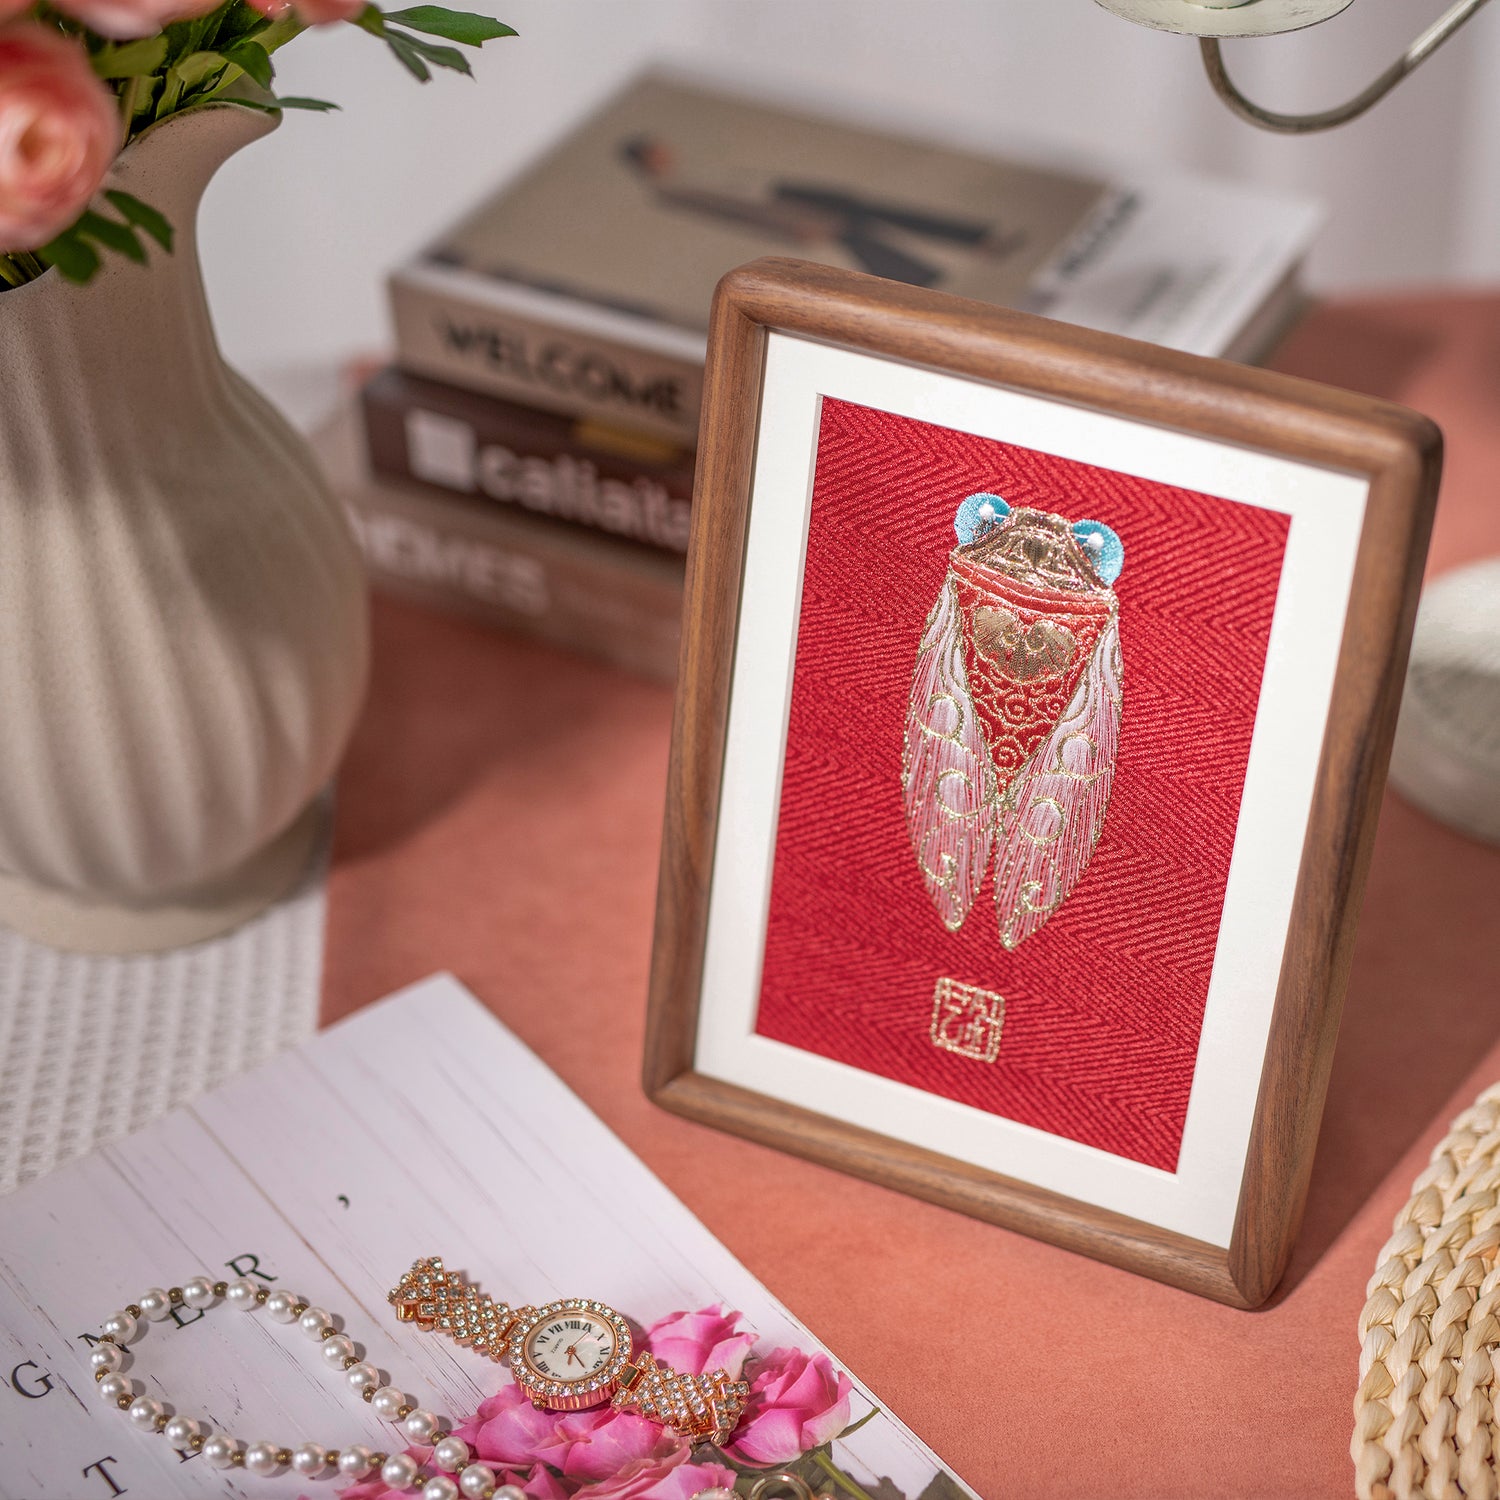 The embroidery artwork design of golden cicada placed on the table, matching to the pink flowers, pearl necklace and gold watch.